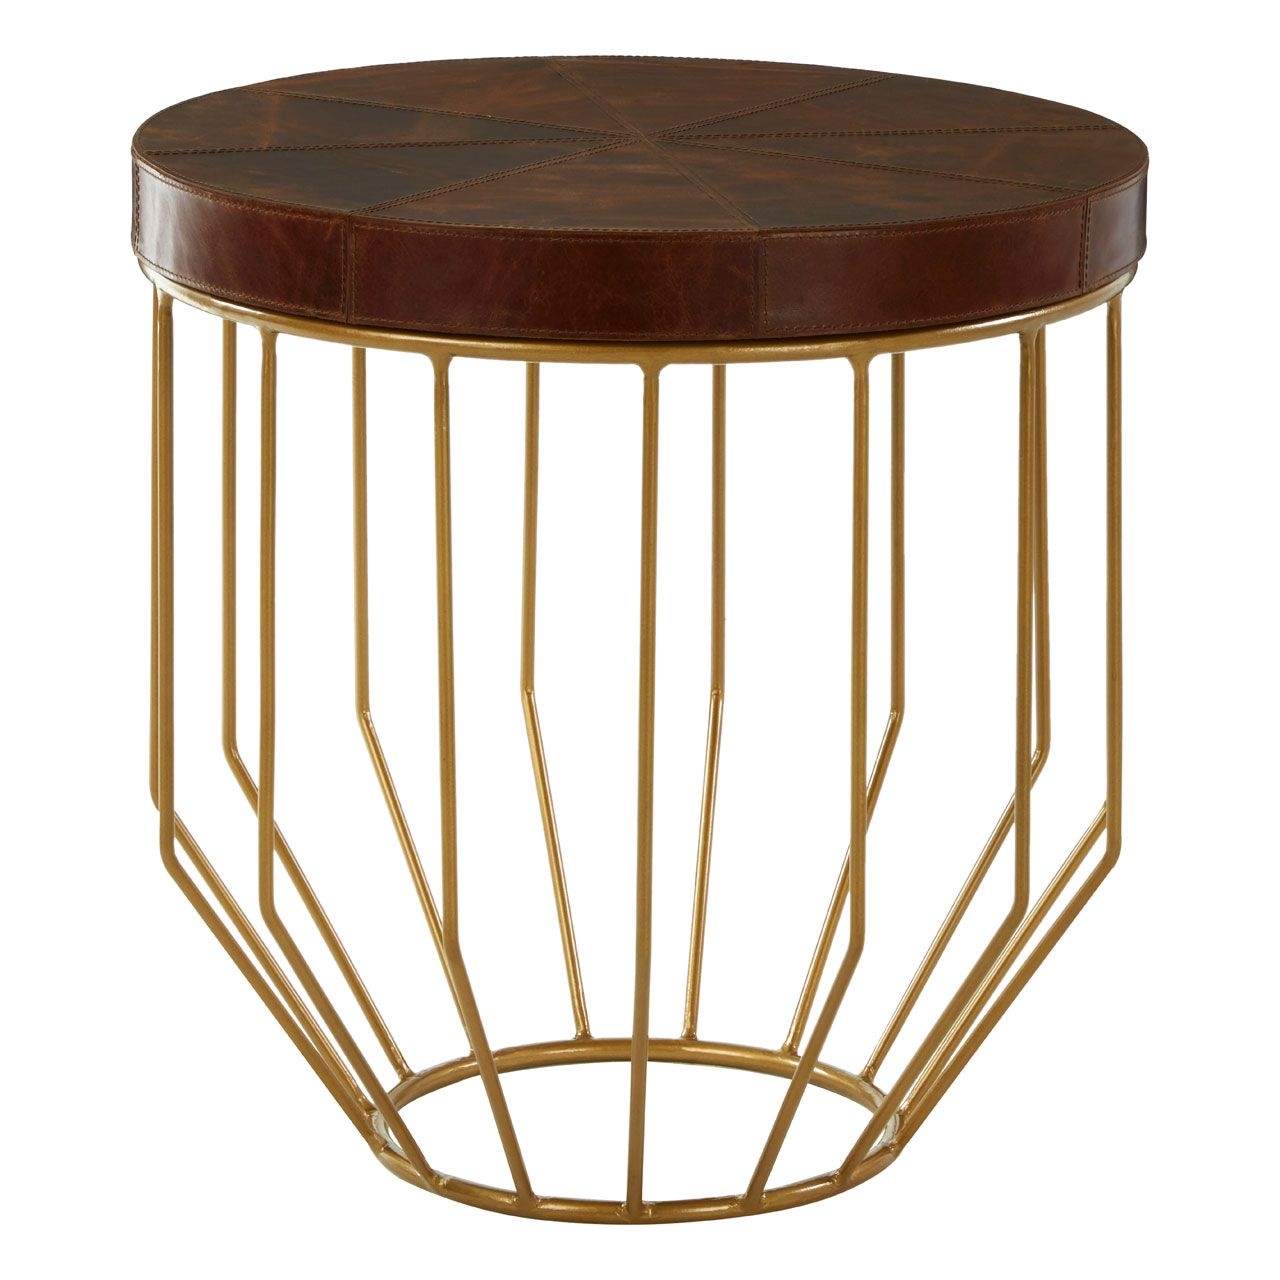 Ianto Round Wooden Side Table In Brown